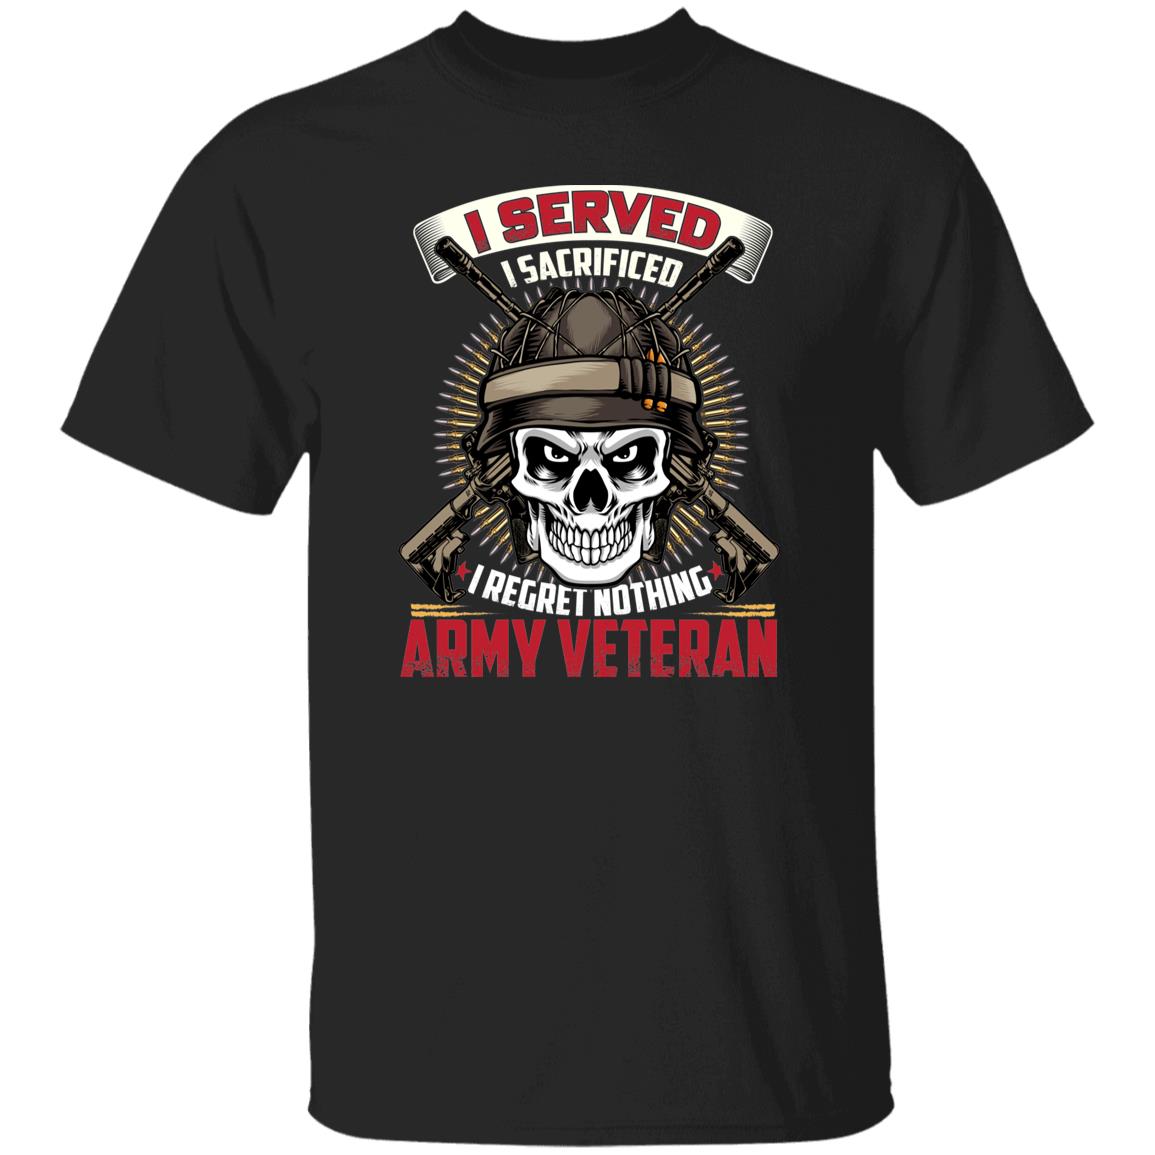 I Served Sacrificed I Regret Nothing Tee For Army Veteran Shirt